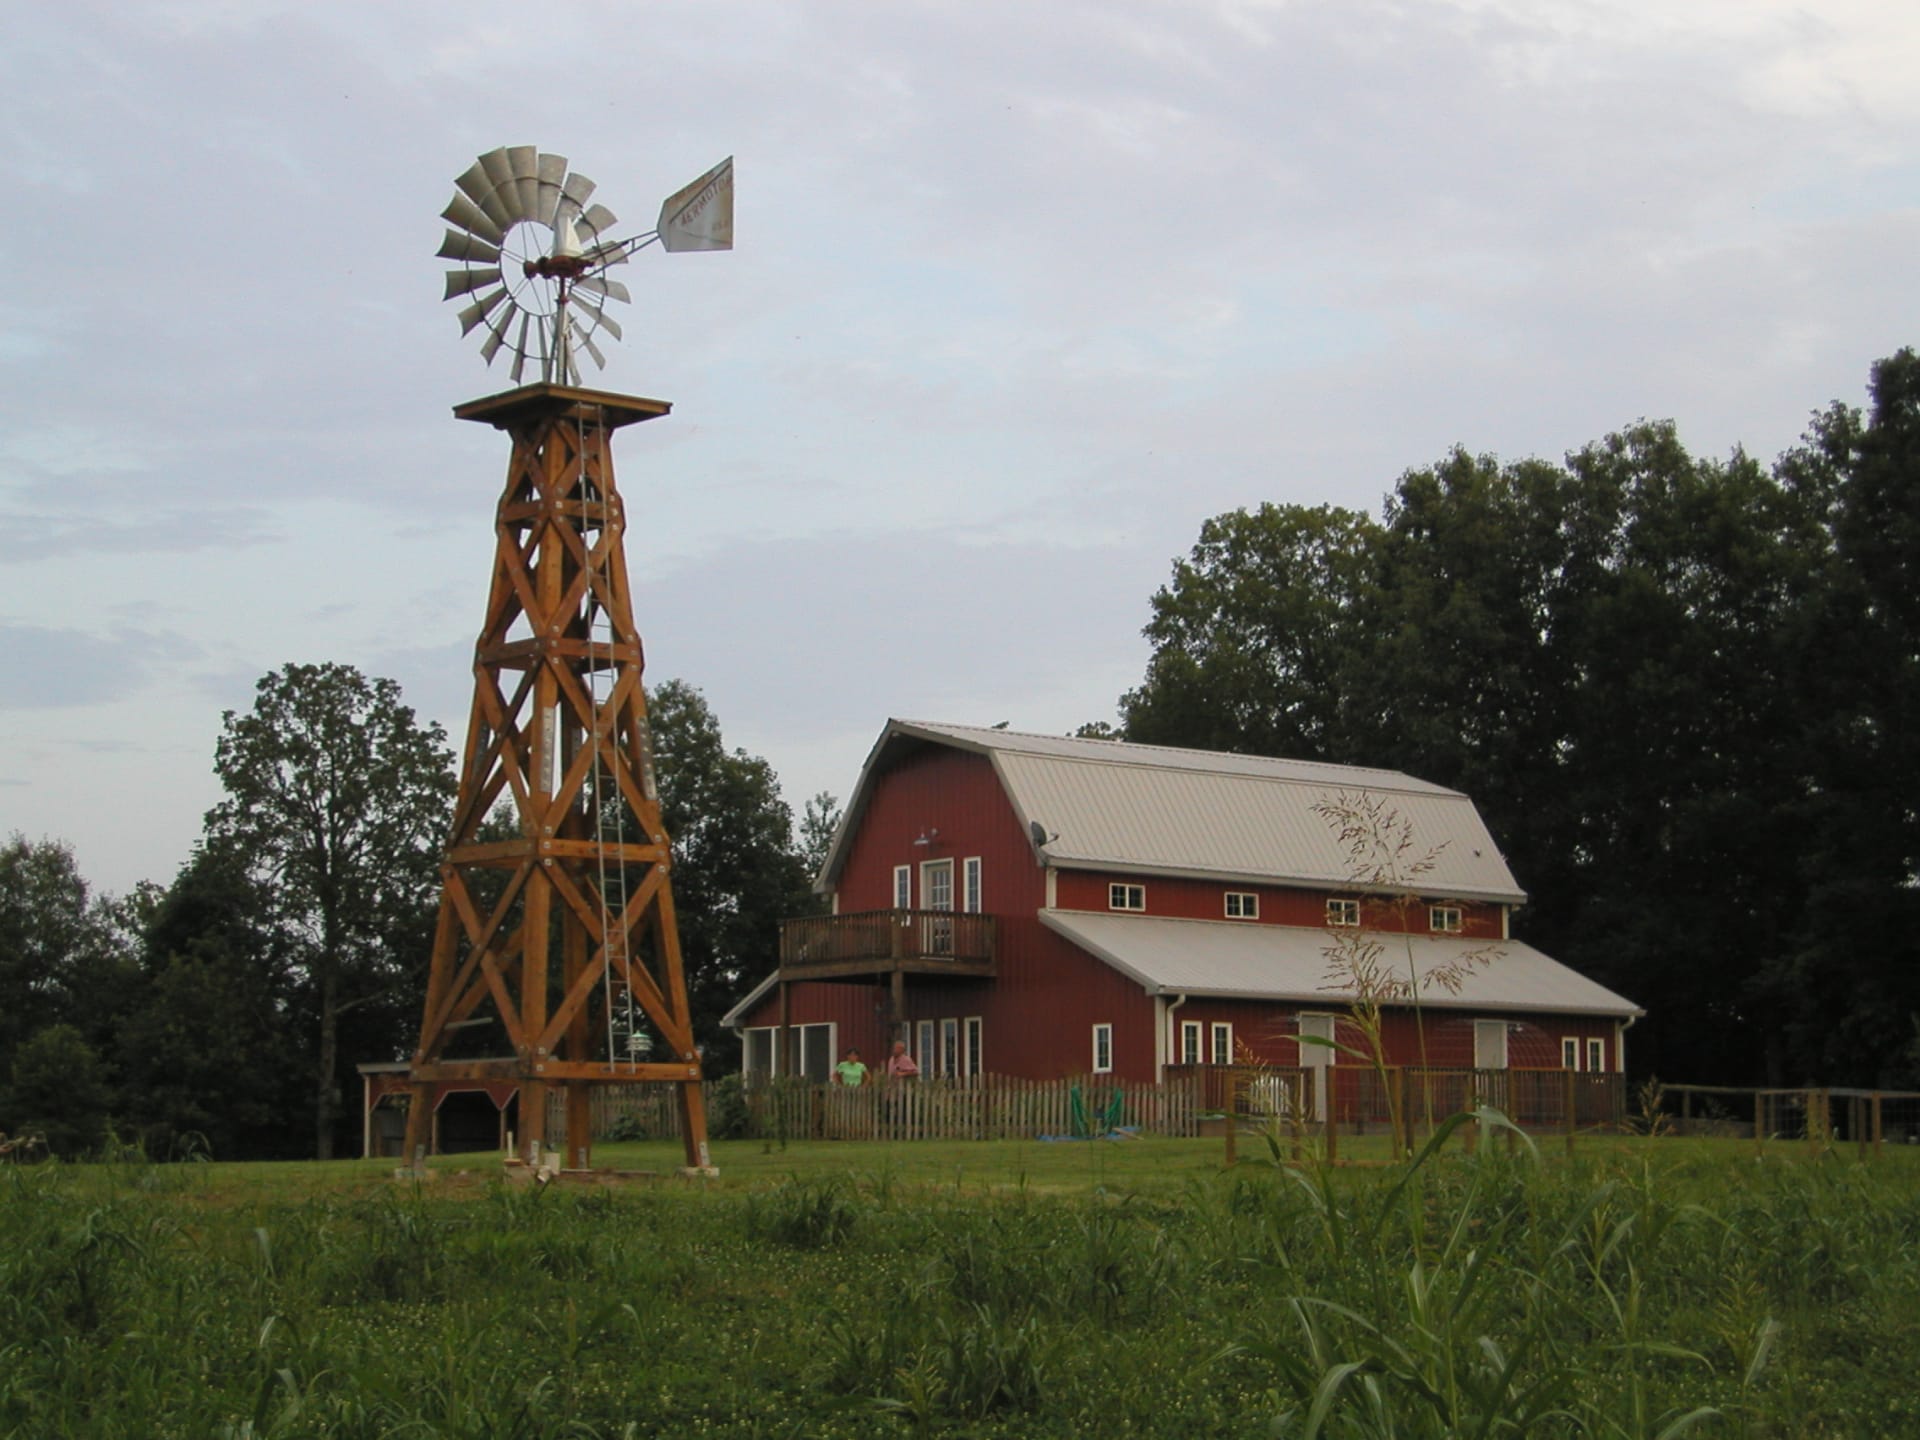 Barn and the windmill in August